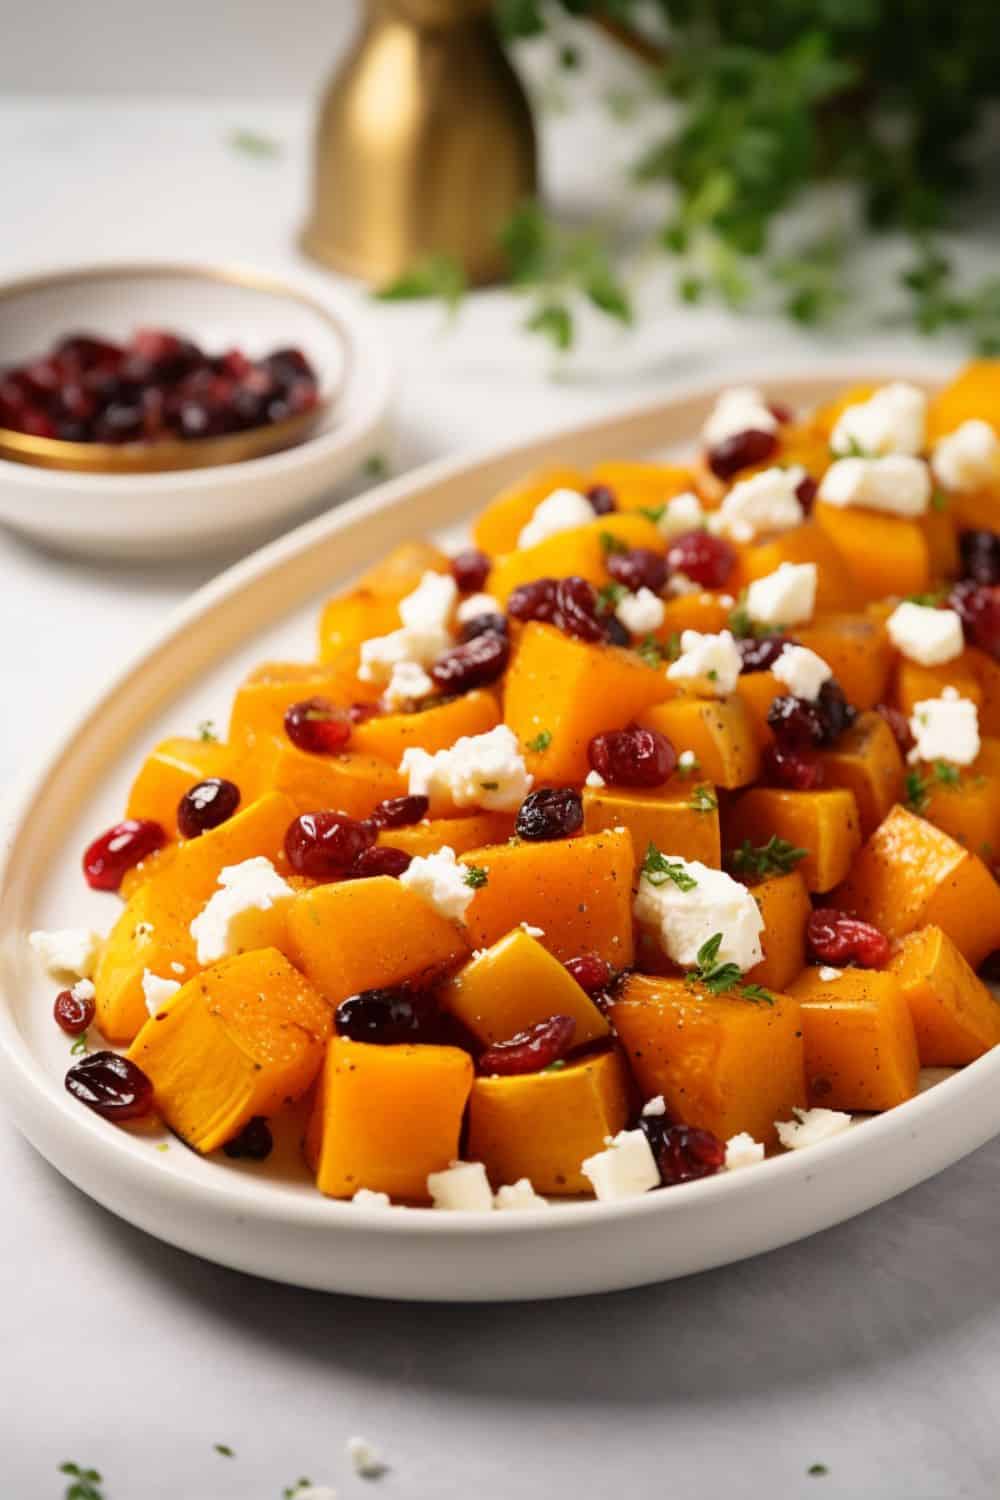 Delicious Honey Roasted Butternut Squash with Cranberries and Feta, garnished with fresh herbs, served as a vibrant, sweet, and savory side dish on a white plate.